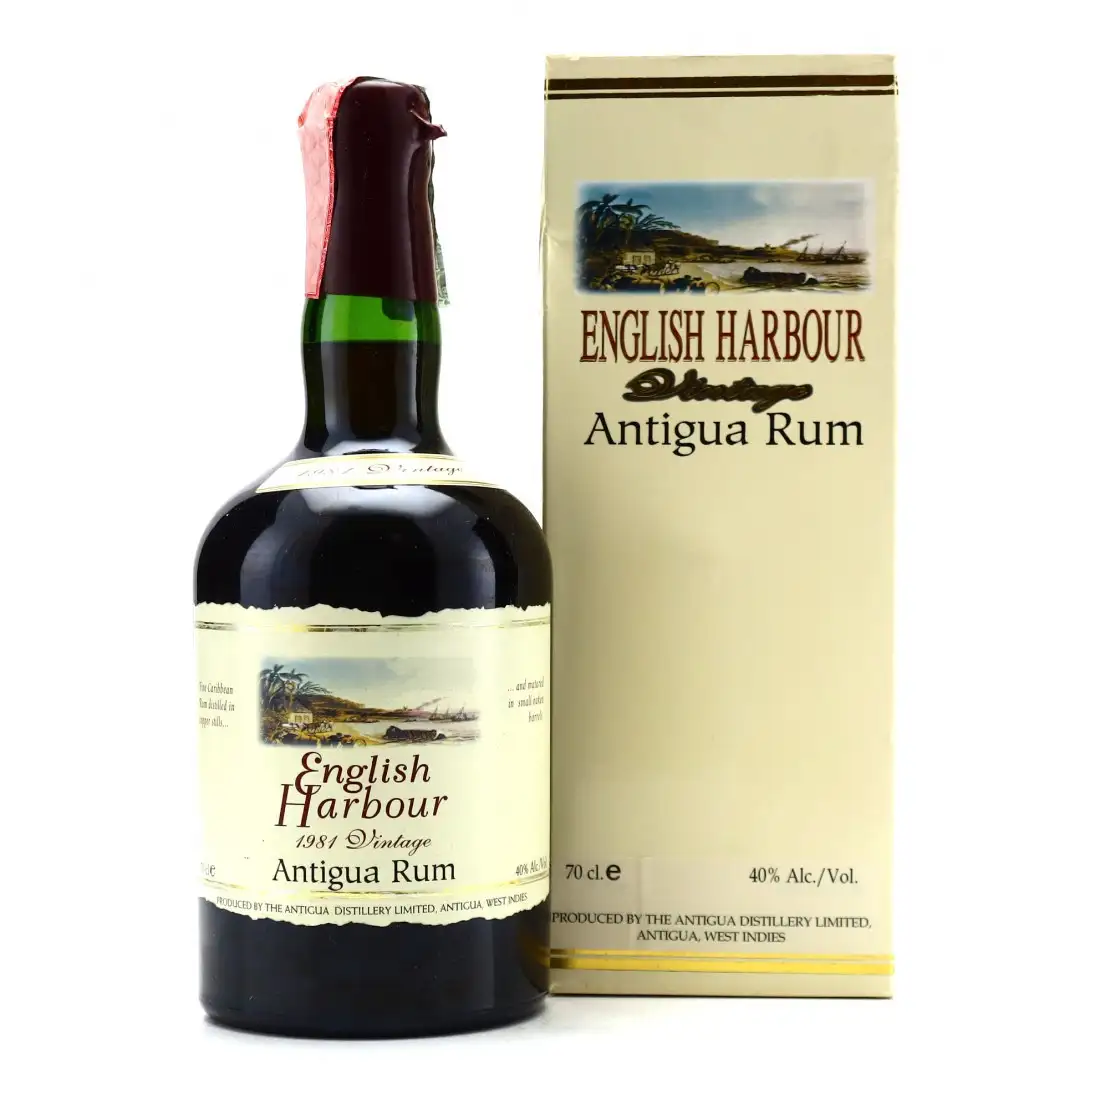 Image of the front of the bottle of the rum English Harbour Extra Old Antigua Rum